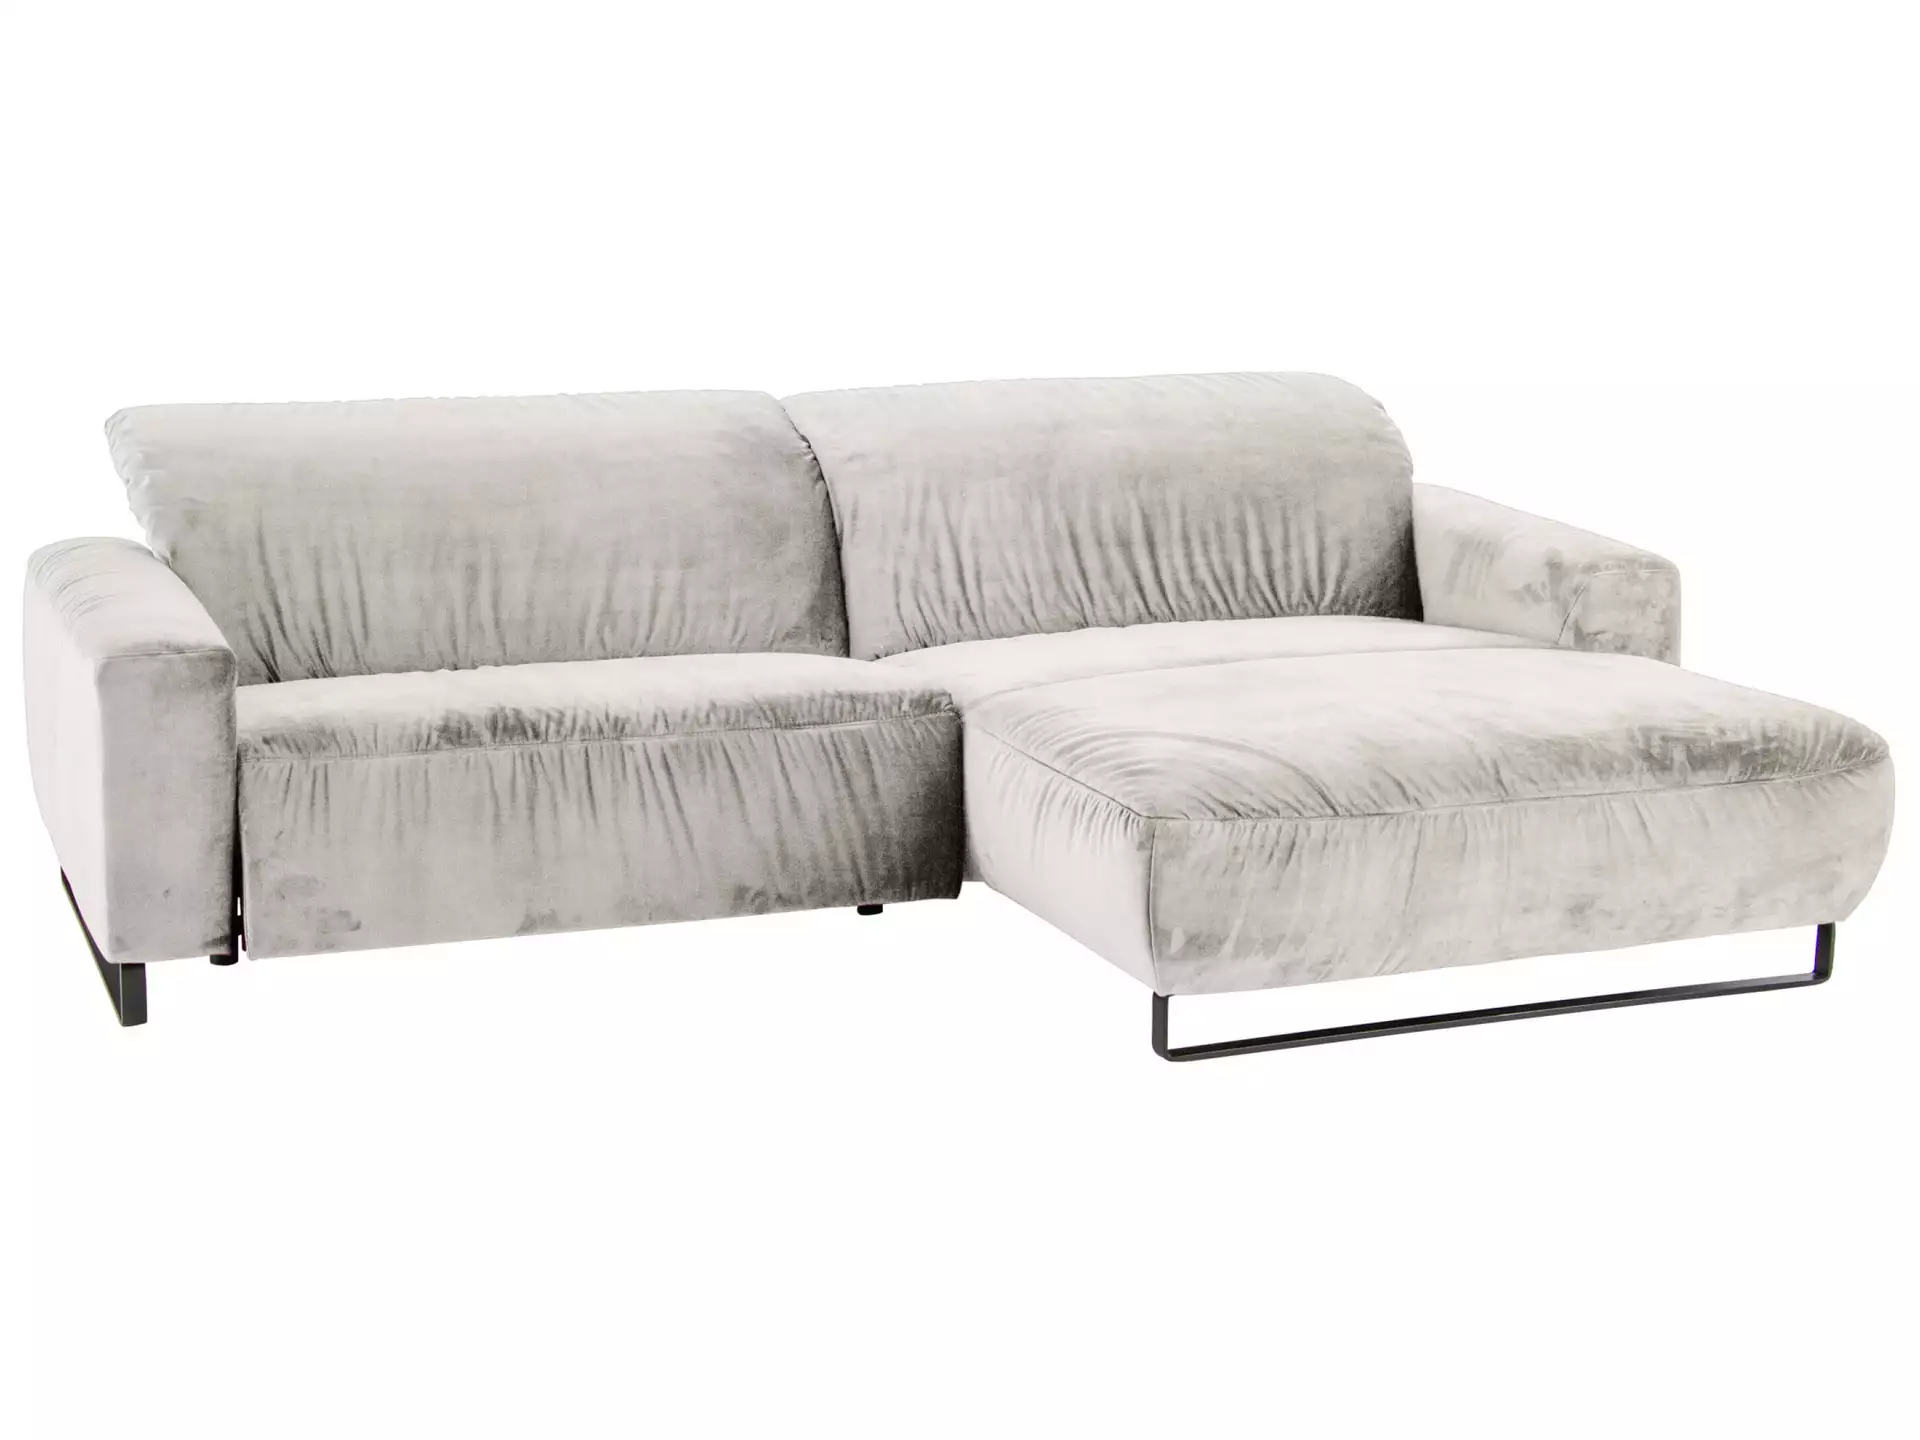 Ecksofa Eindhoven Basic Candy / Farbe: Nature / Material: Stoff Basic